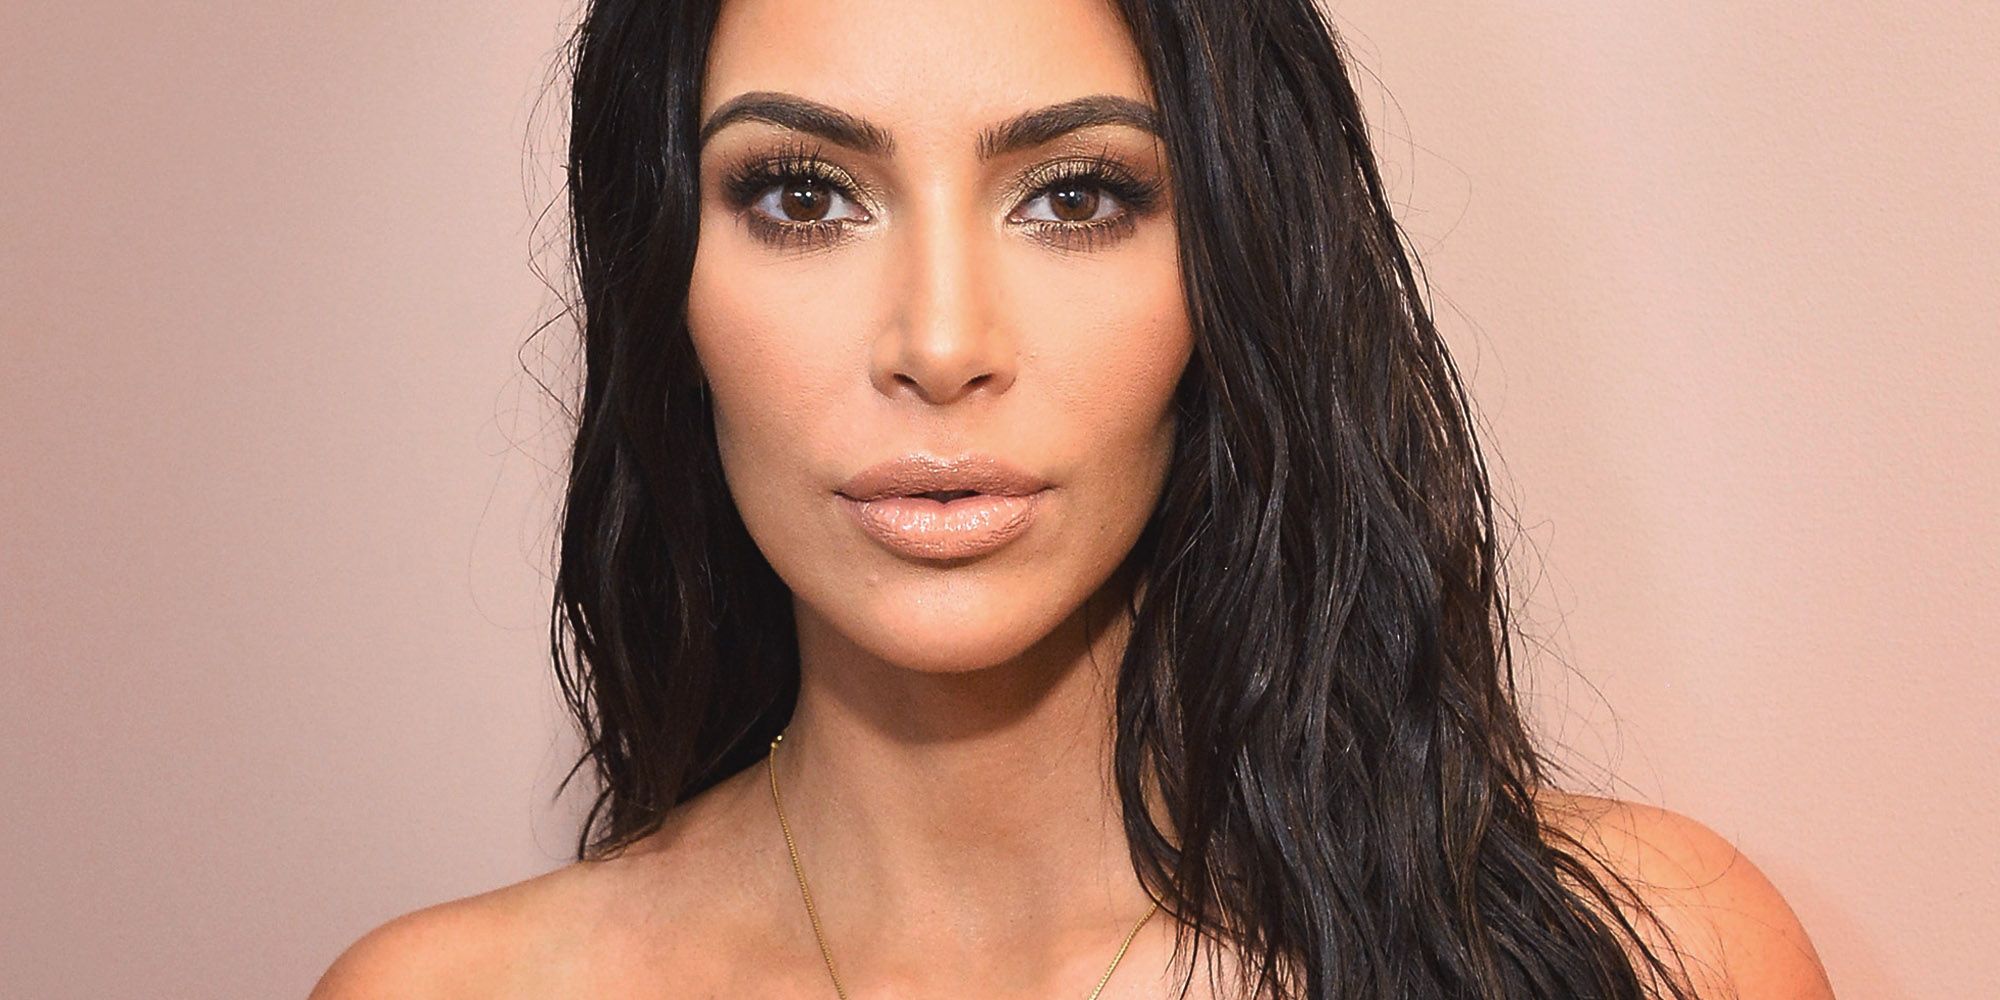 Kim Kardashian Under Eye These Are The Eye Patches Kkw Uses For Dark Circles When The Vr